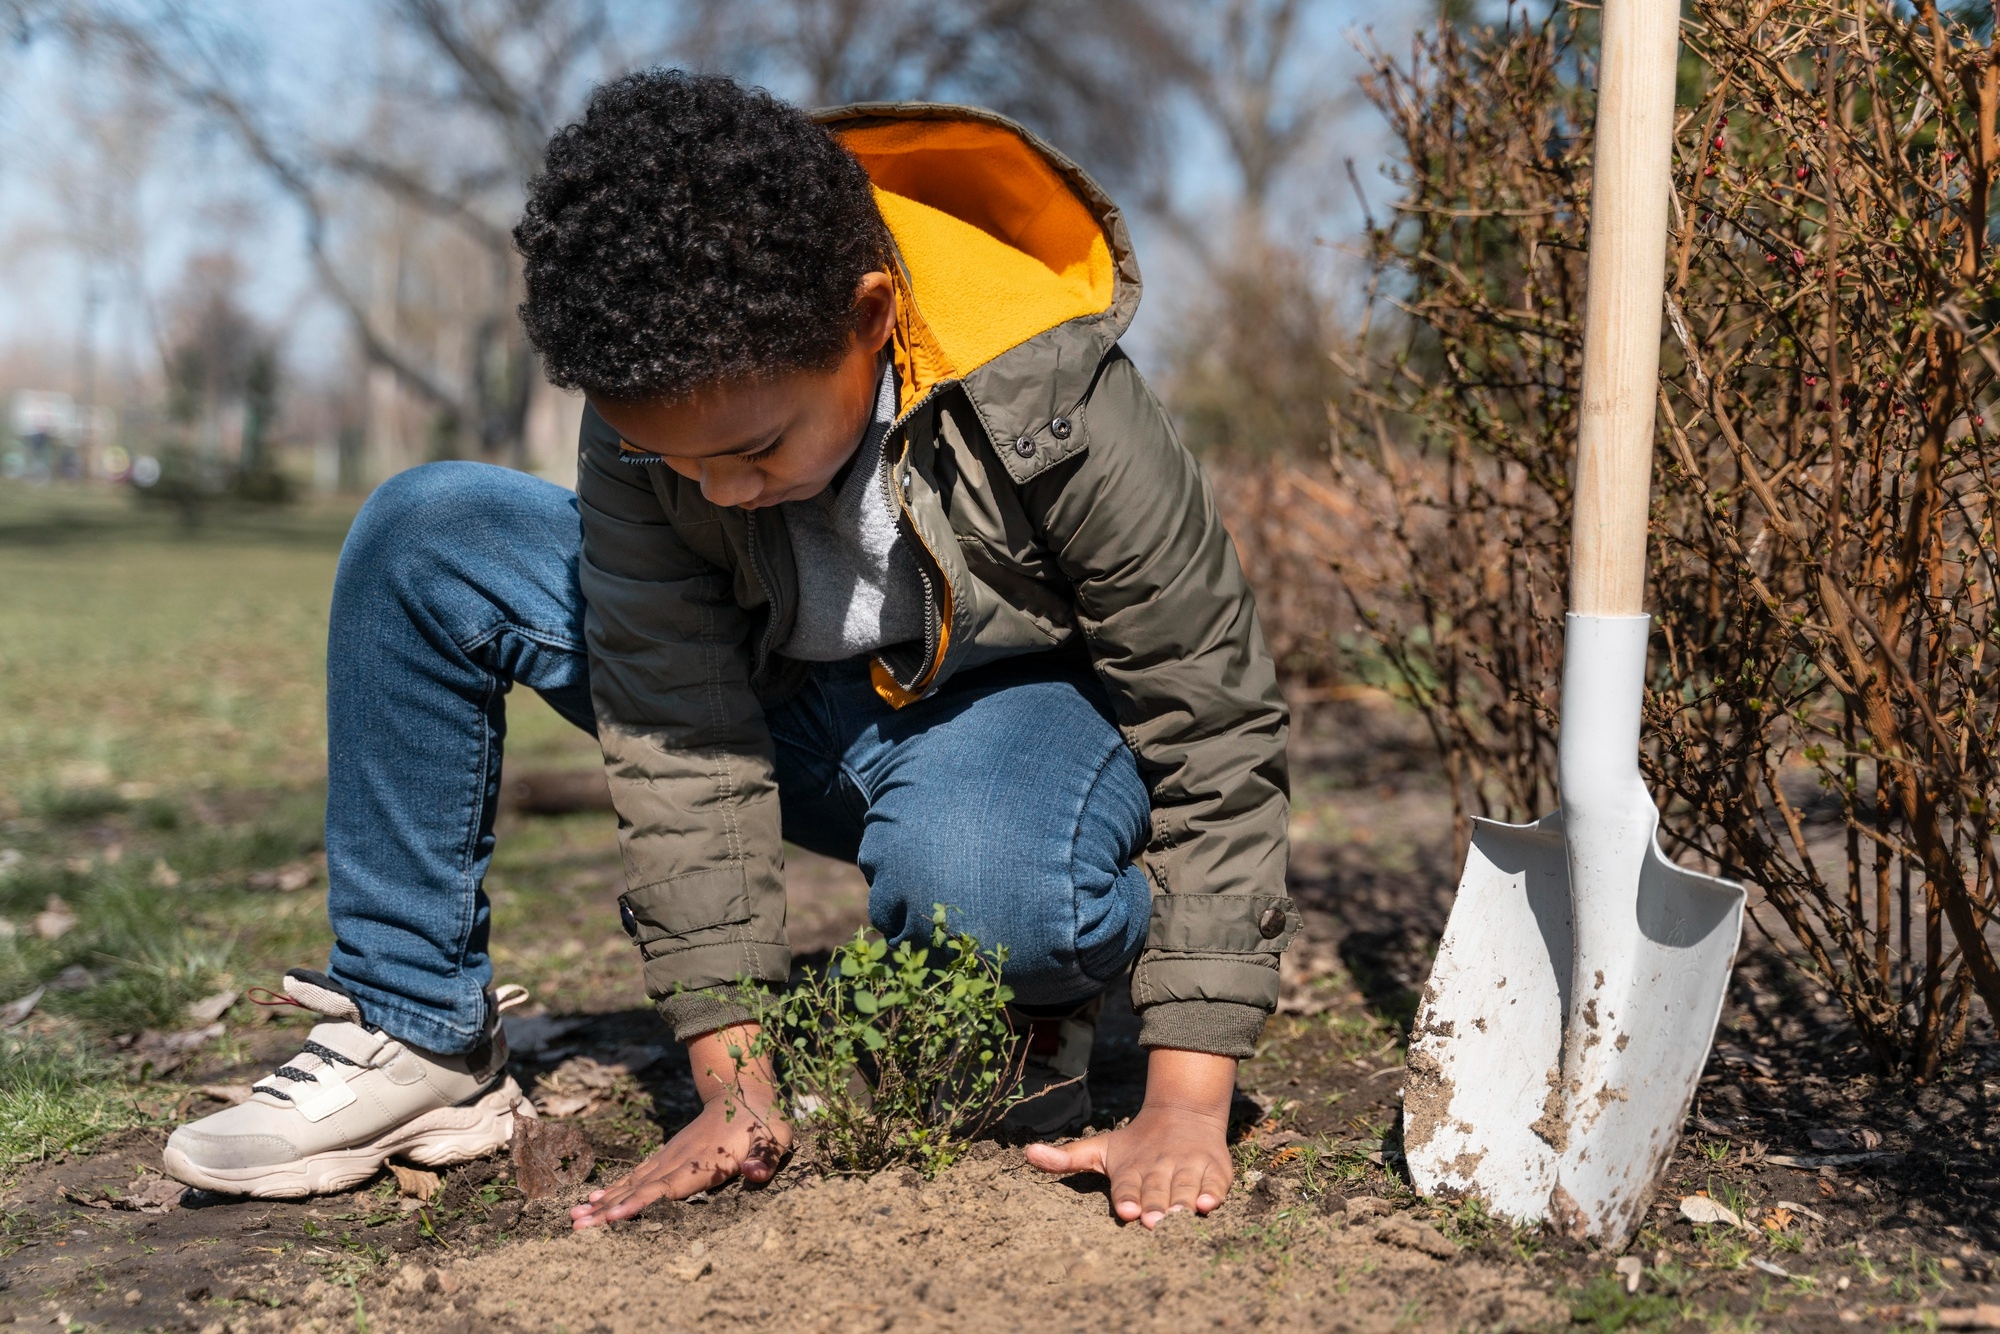 A young boy doing yard work | Source: Pexels